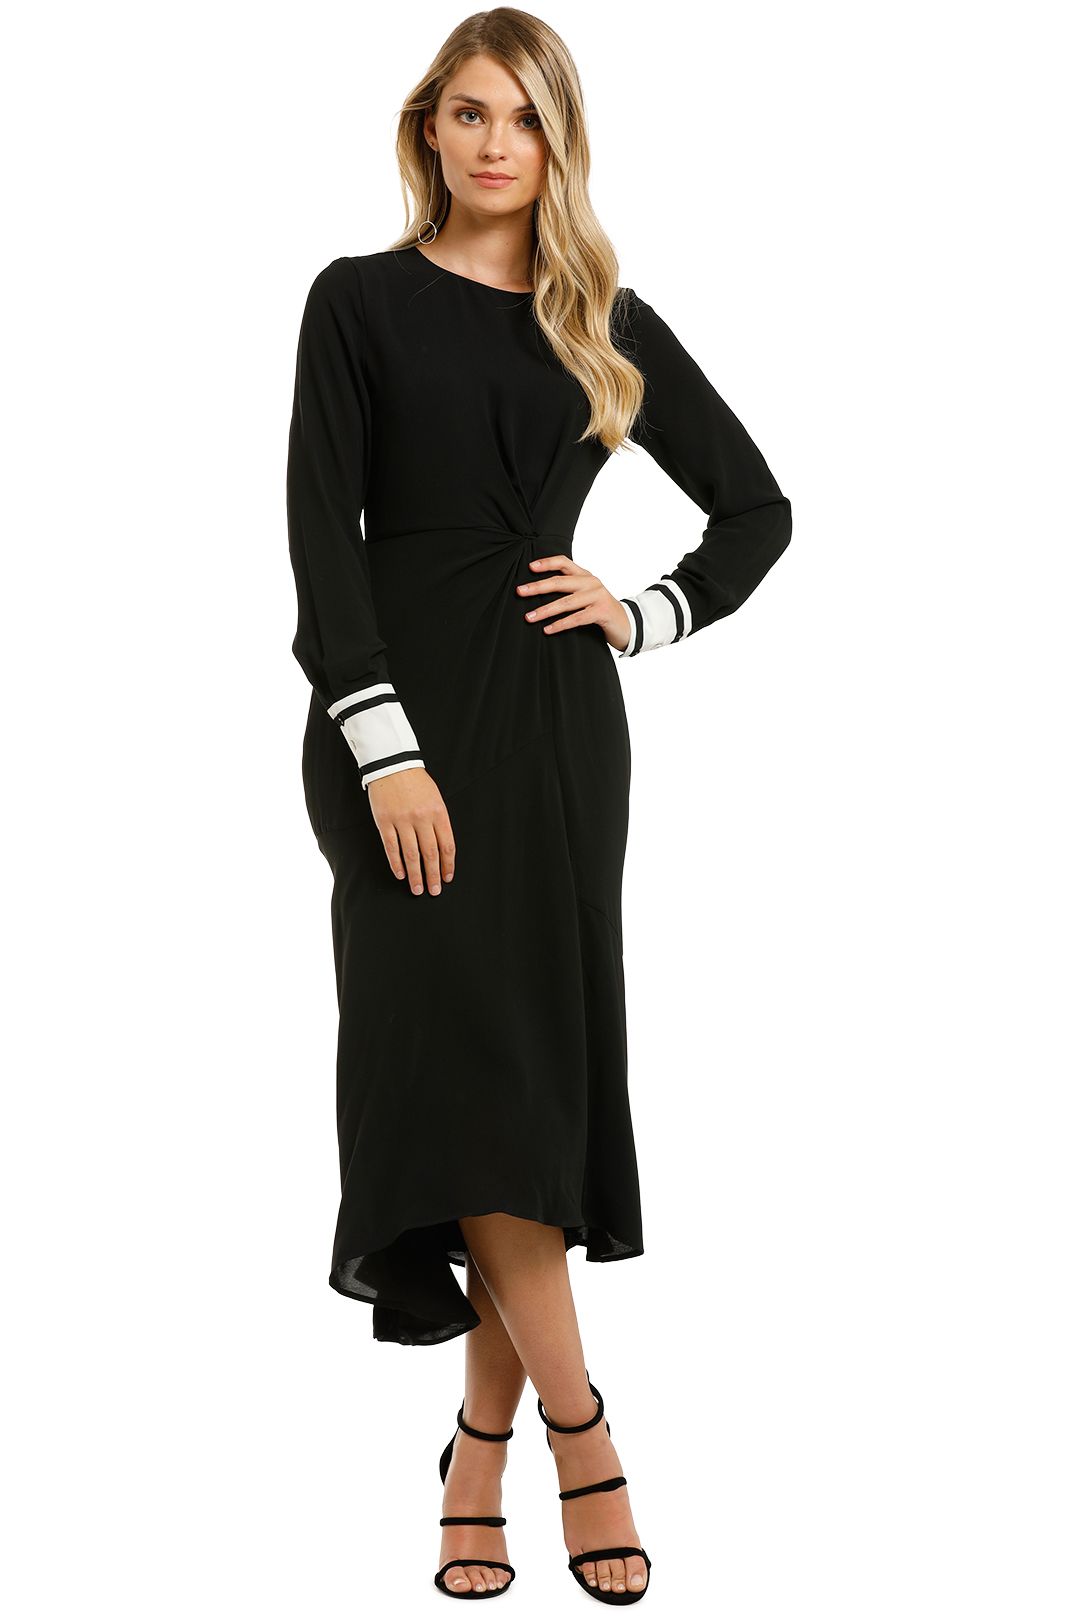 Sure-Thing-Dress-Black-White-Front